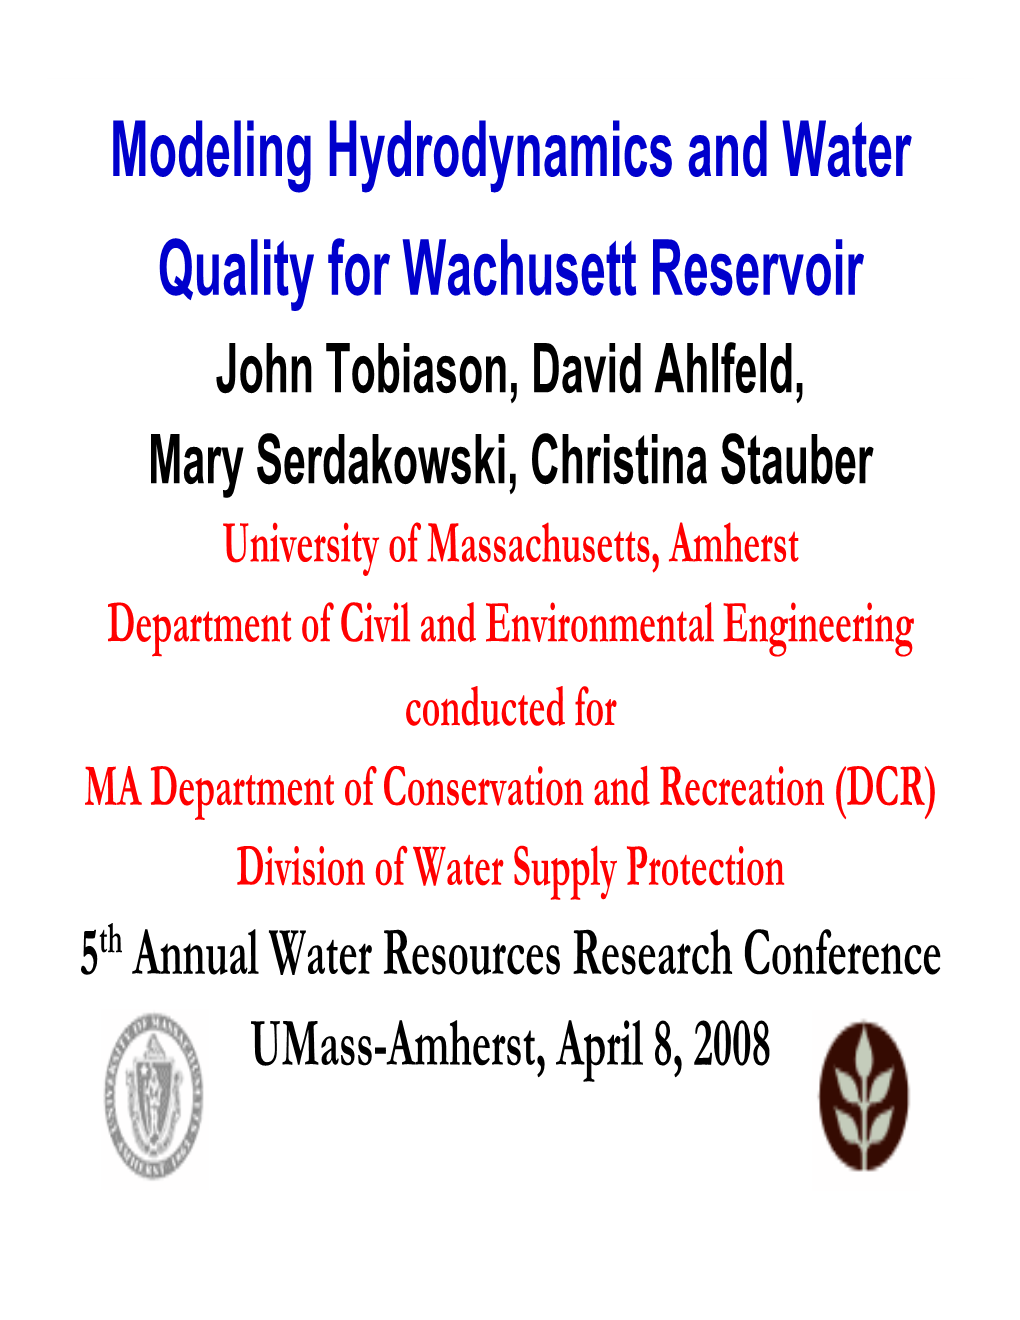 Modeling Hydrodynamics and Water Quality for Wachusett Reservoir